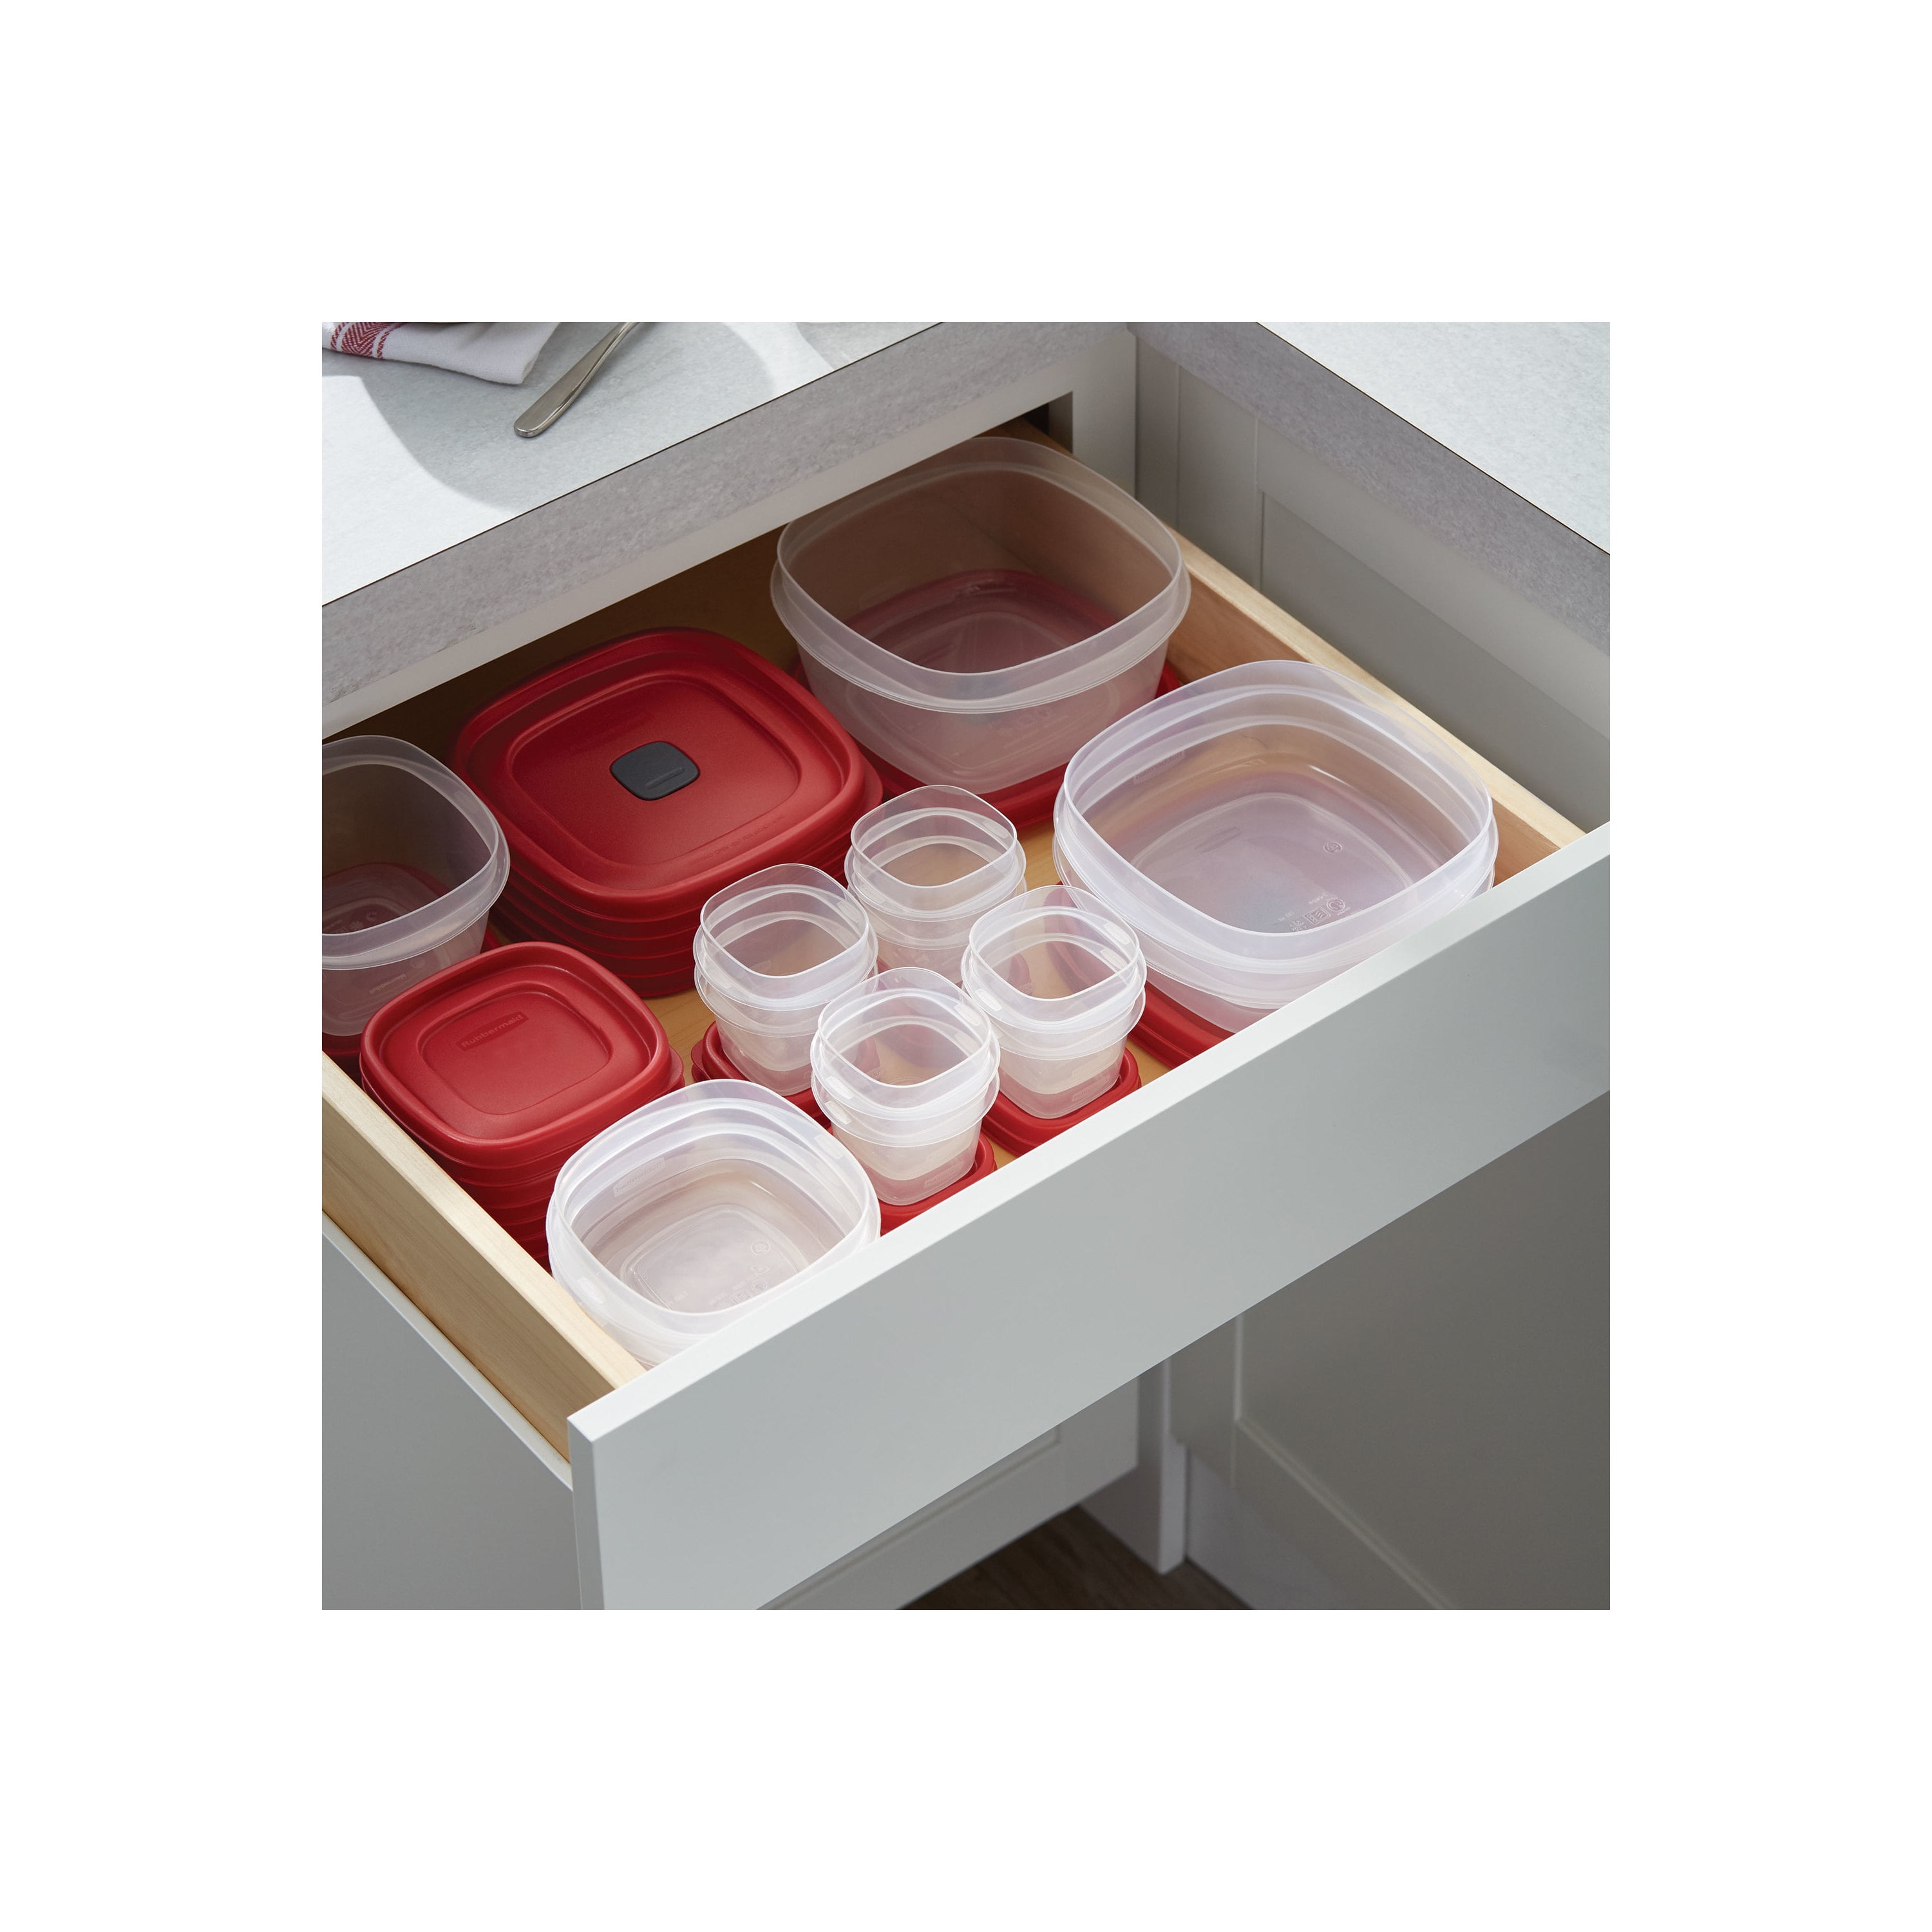 19995 Rubbermaid Servin Saver Cake Keeper 13Diam x 7H Freezer And  Dishwasher Safe, Rubbermaid Servin Saver Two Cup Storage Container 6W x  6D x 2H, Rubbermaid Commercial 8 Qt. Food Storage Container